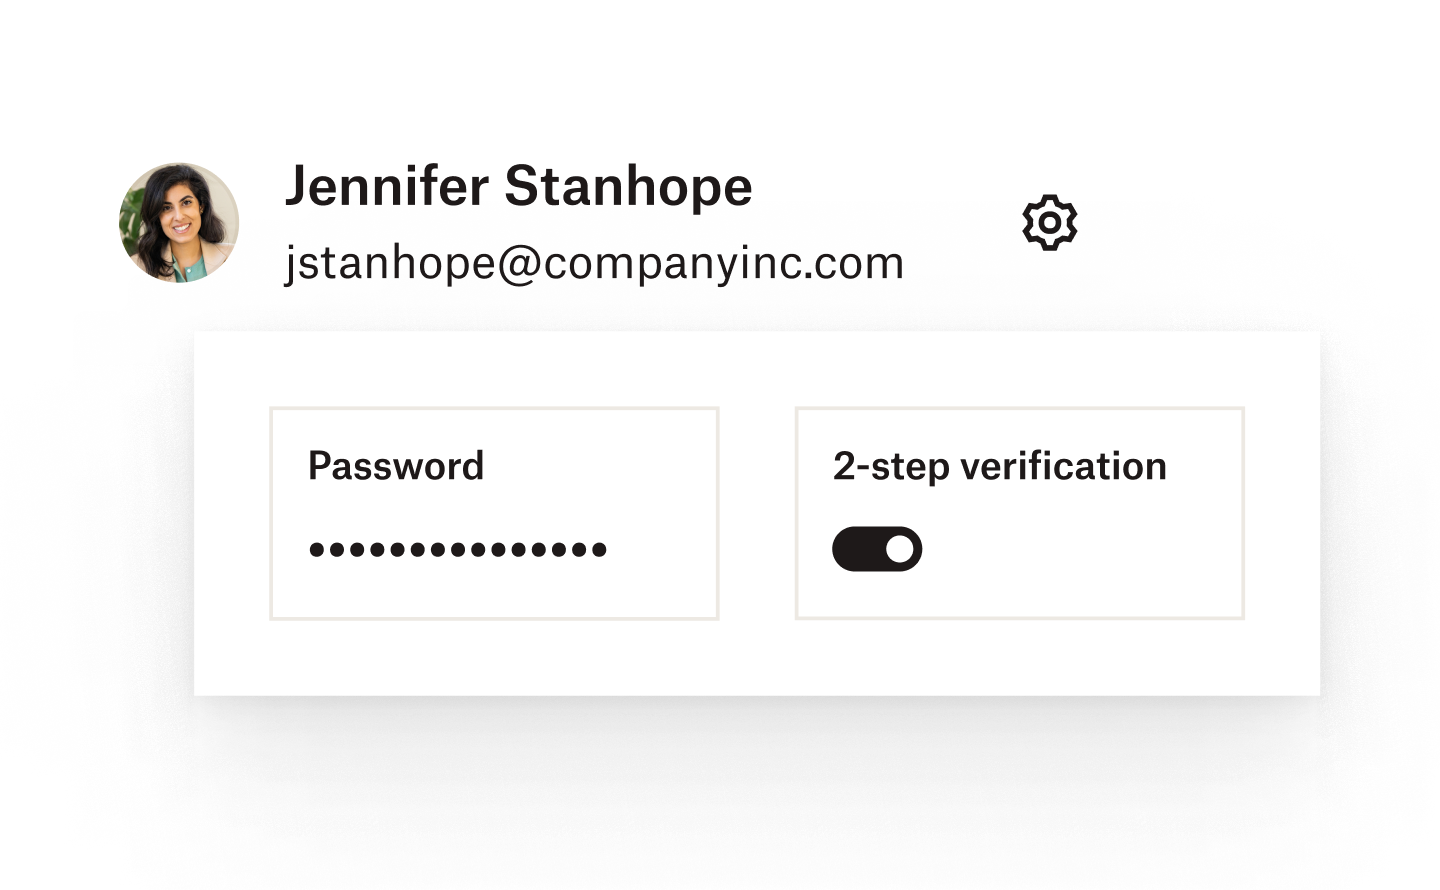 A password and 2-step verification setting being added to a user account